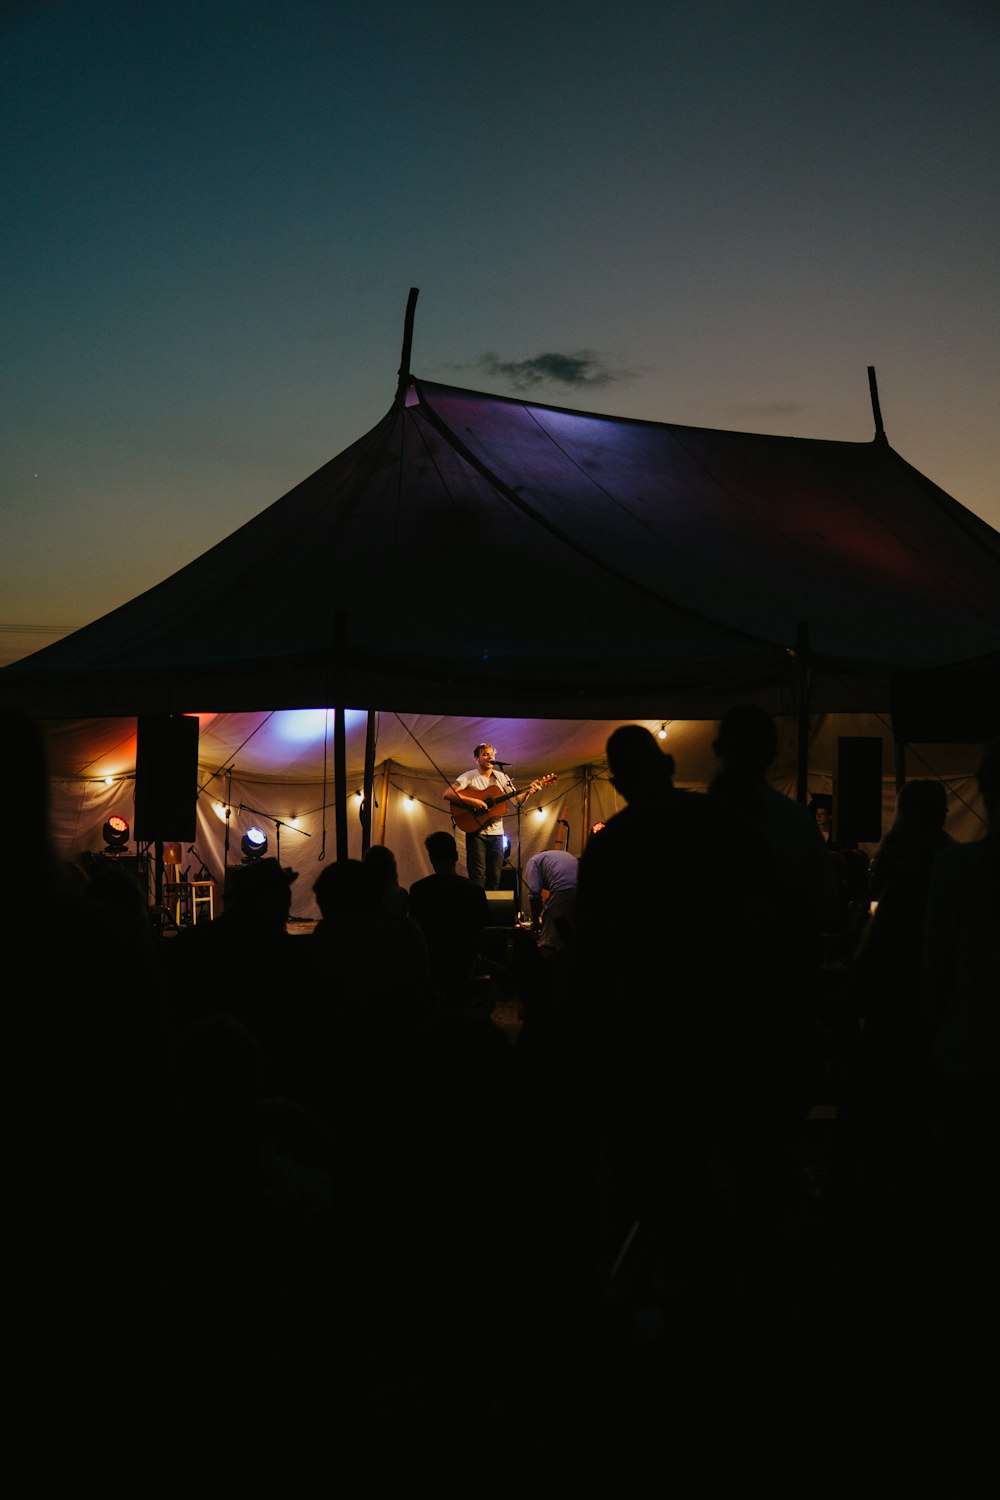 a group of people standing under a tent at night